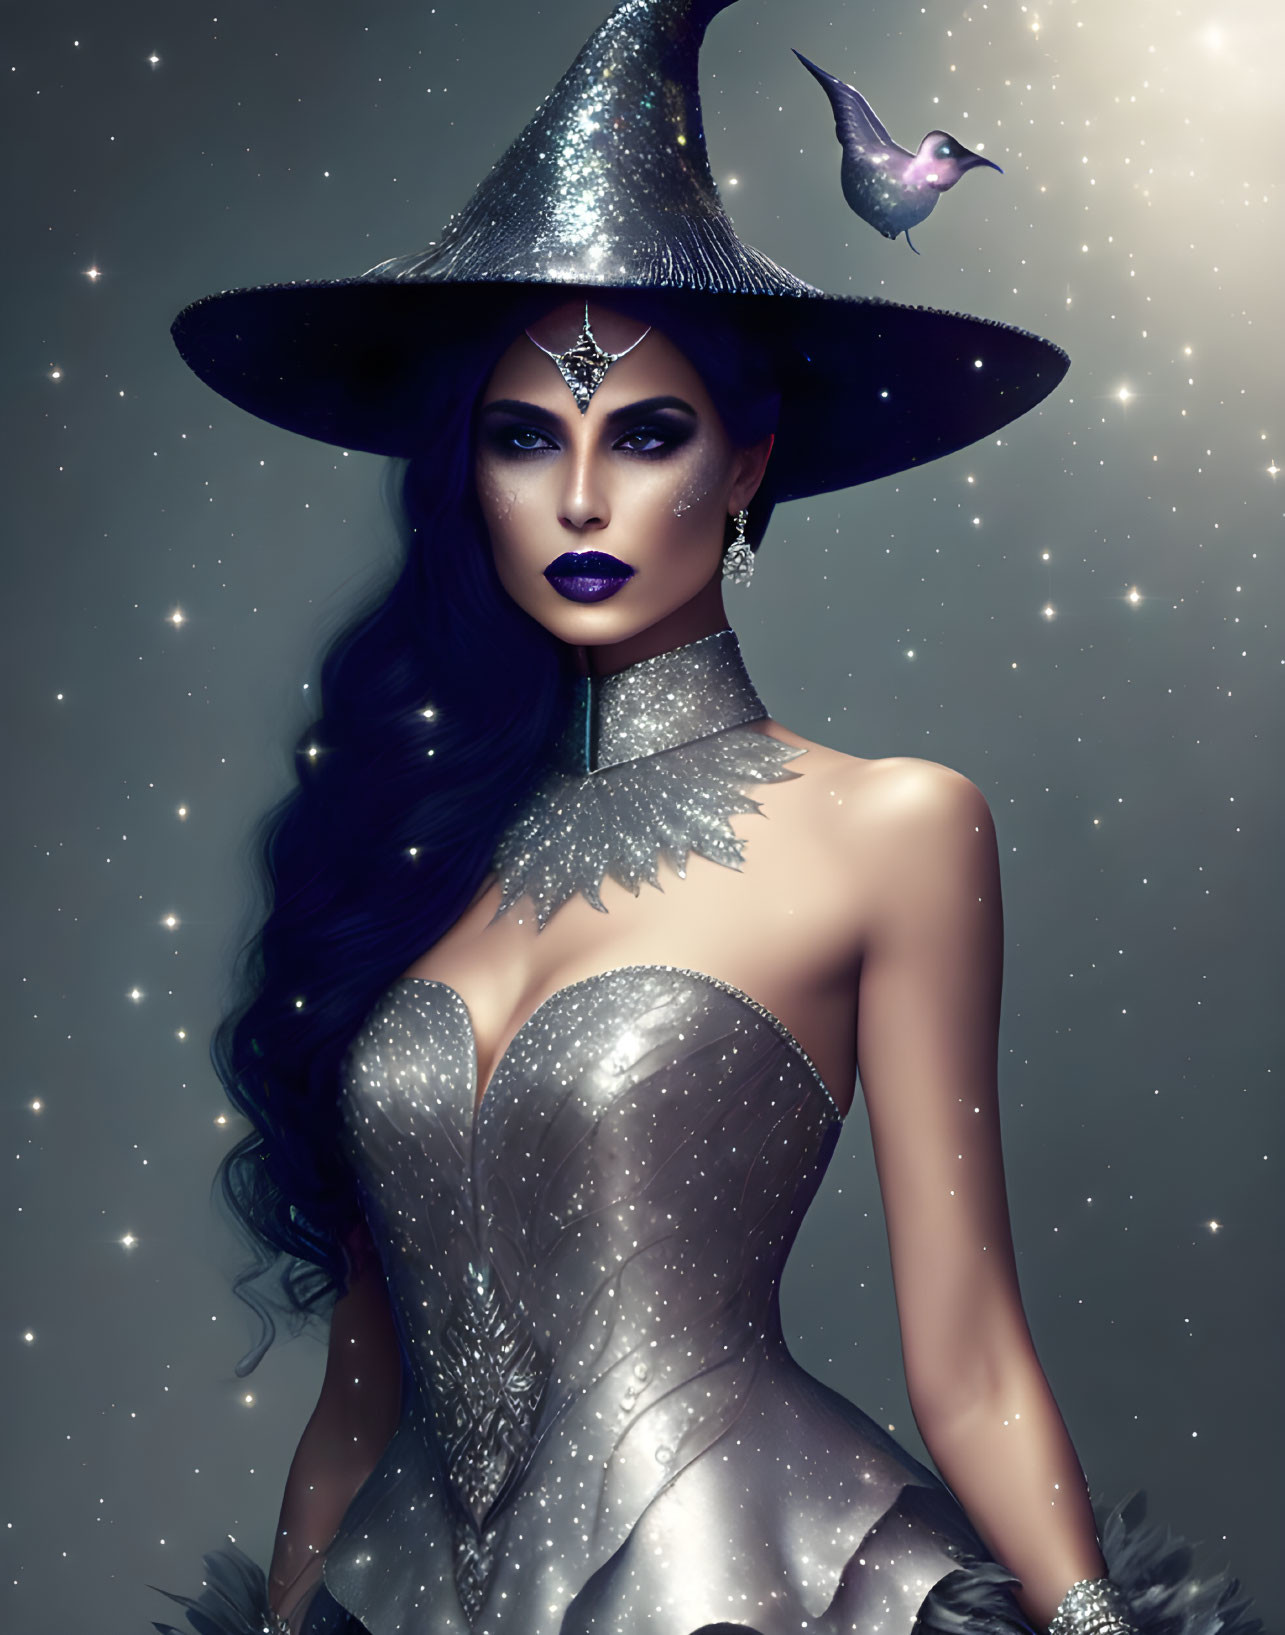 Mystical woman in silver outfit with pointed hat and bird in starry setting